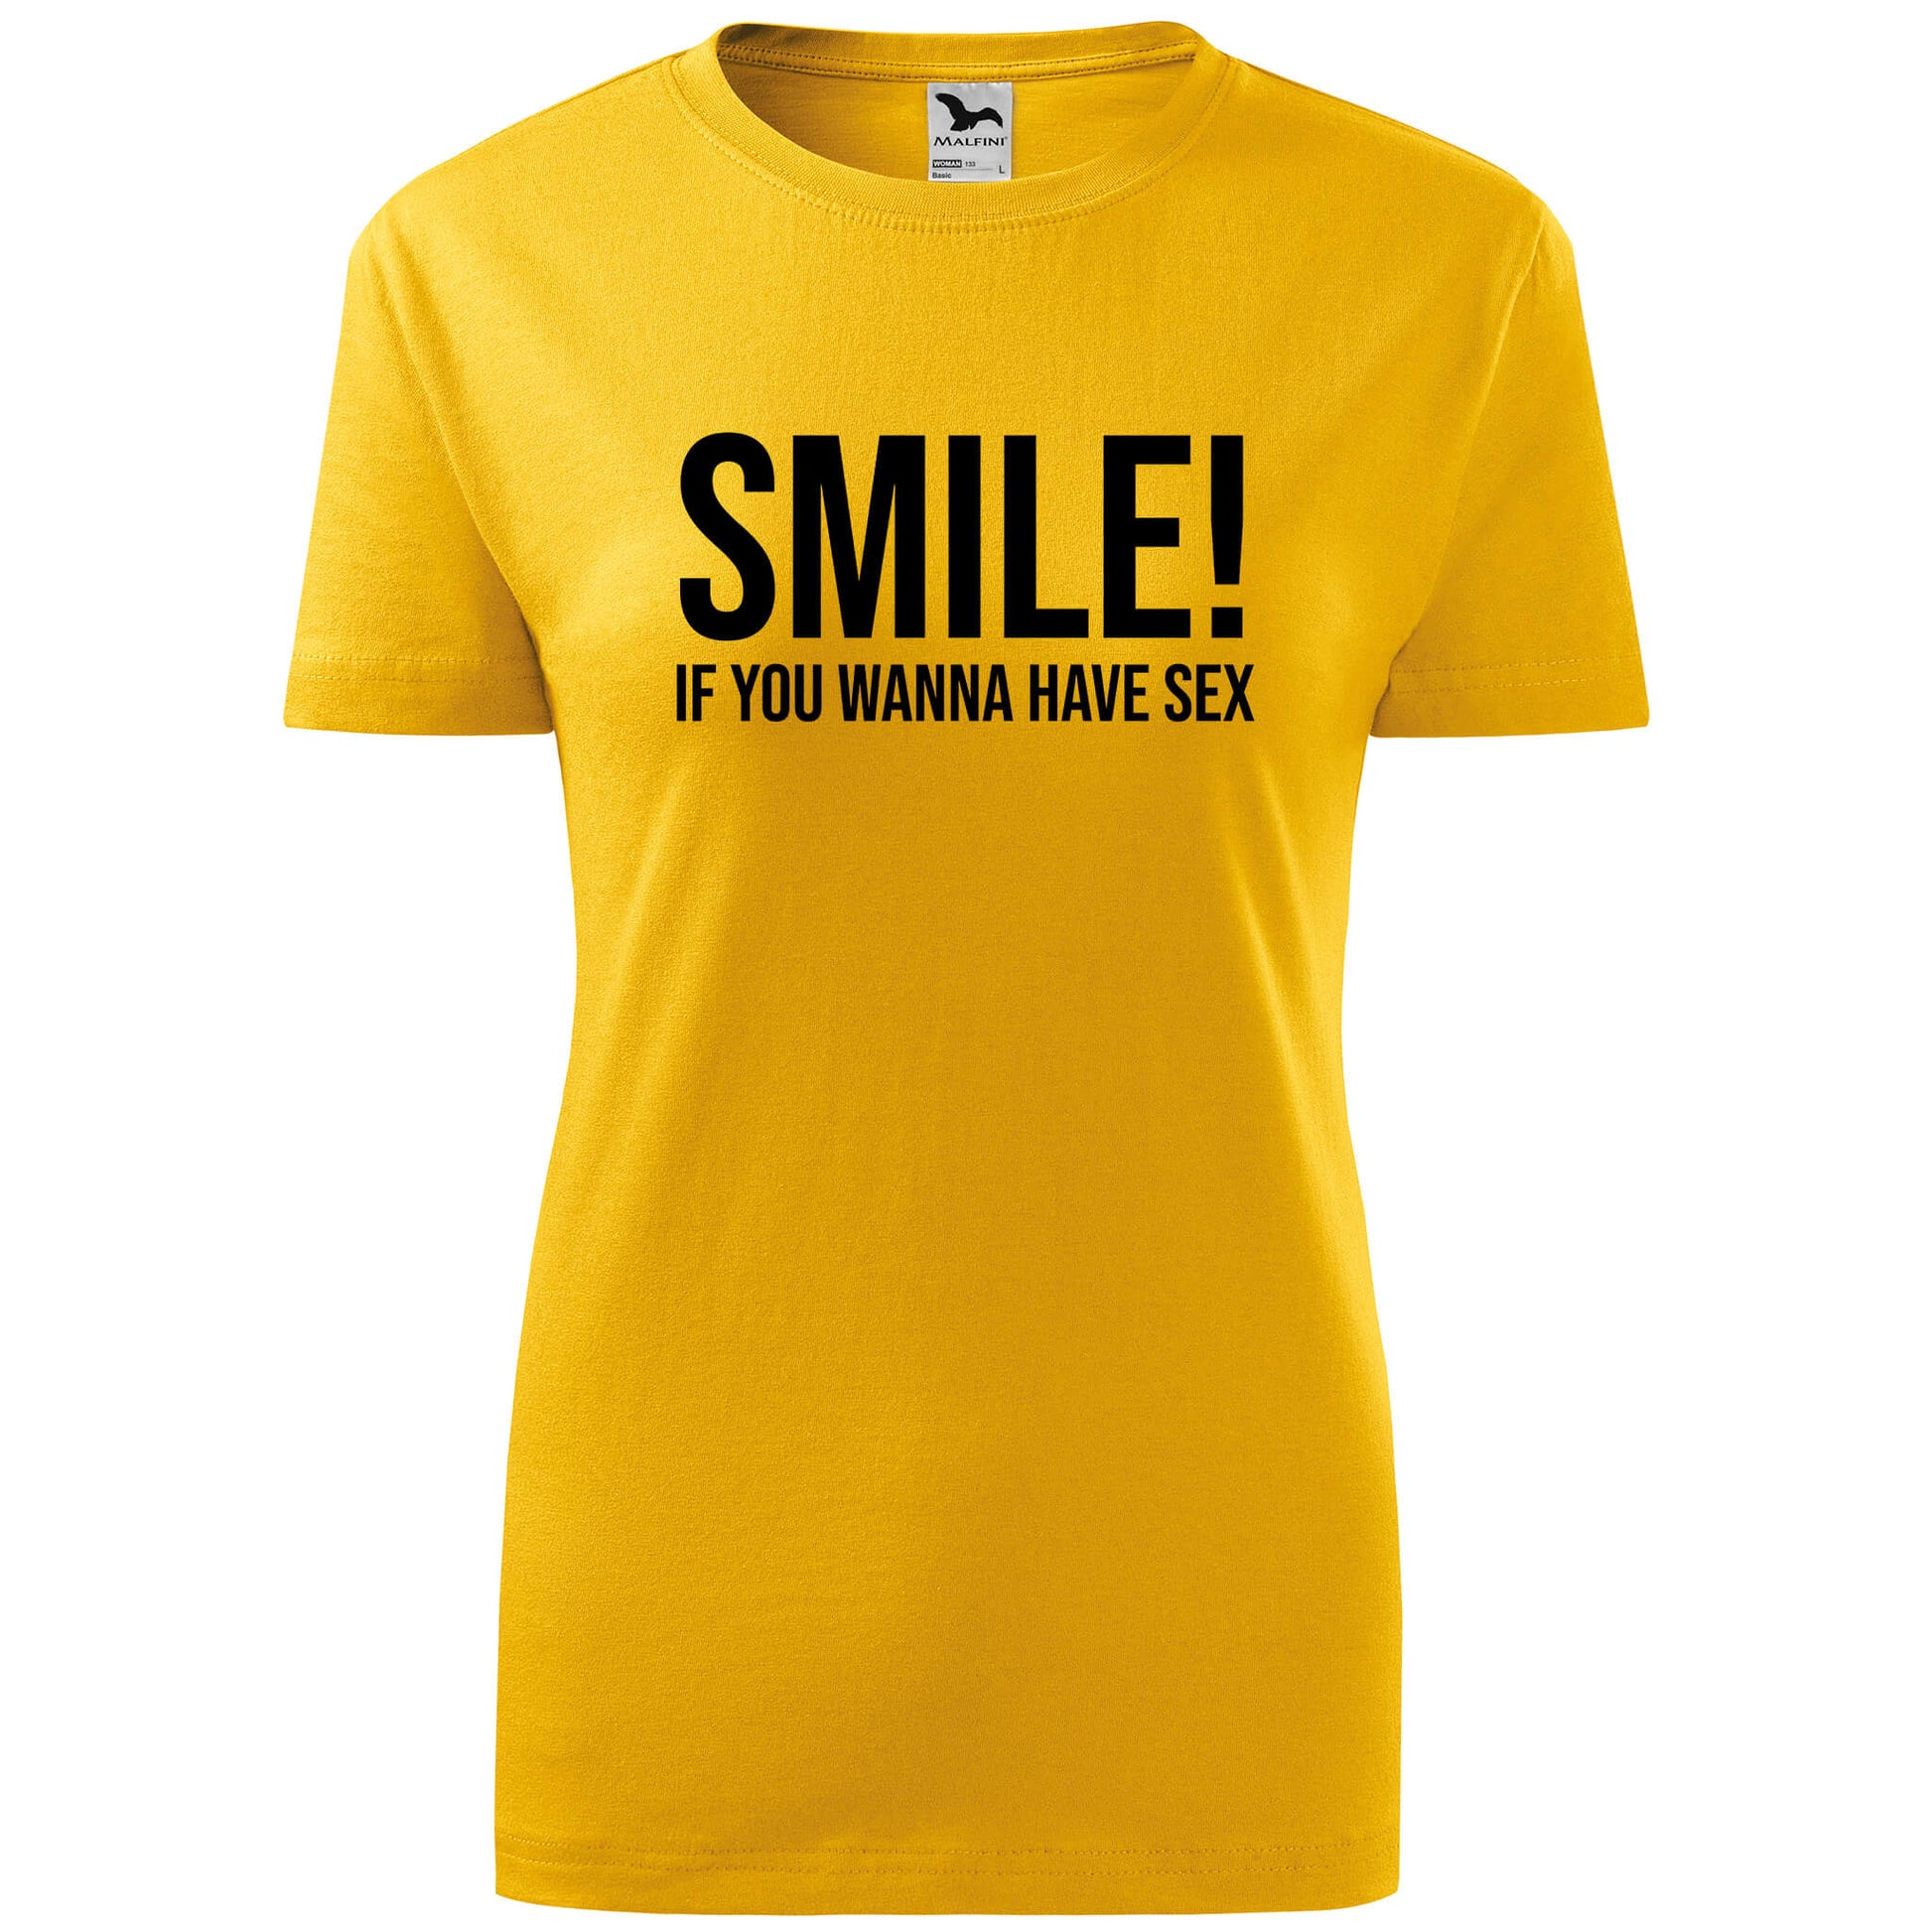 T-shirt - Smile! If you wanna have sex - rvdesignprint